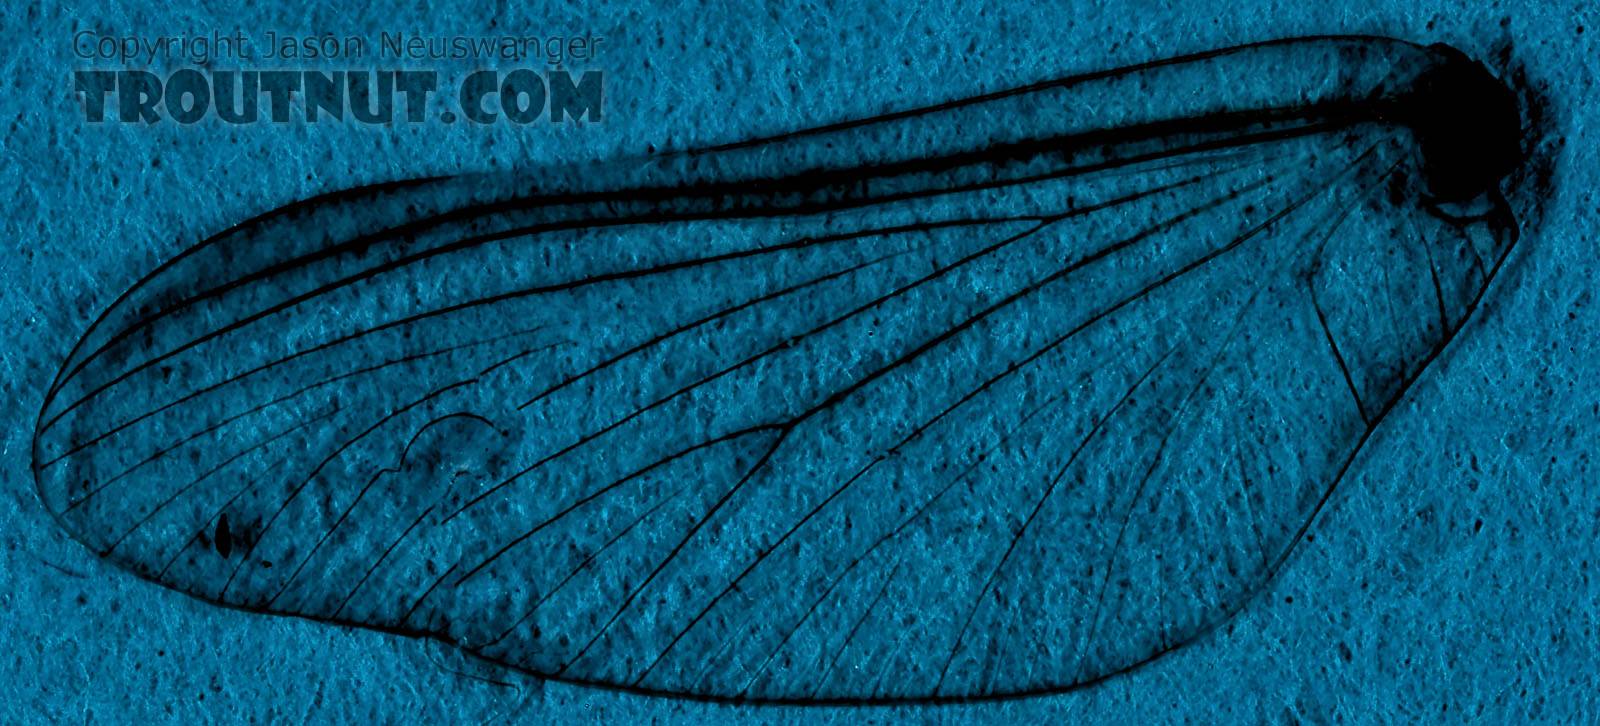 This specimen was one of my first attempts to do a "wingprint" to digitally enhance an image of the wing venation for identification purposes.  I didn't have the background far enough back to be out of focus -- a mistake I later corrected.  Male Ephemerella invaria (Sulphur Dun) Mayfly Spinner from the Teal River in Wisconsin